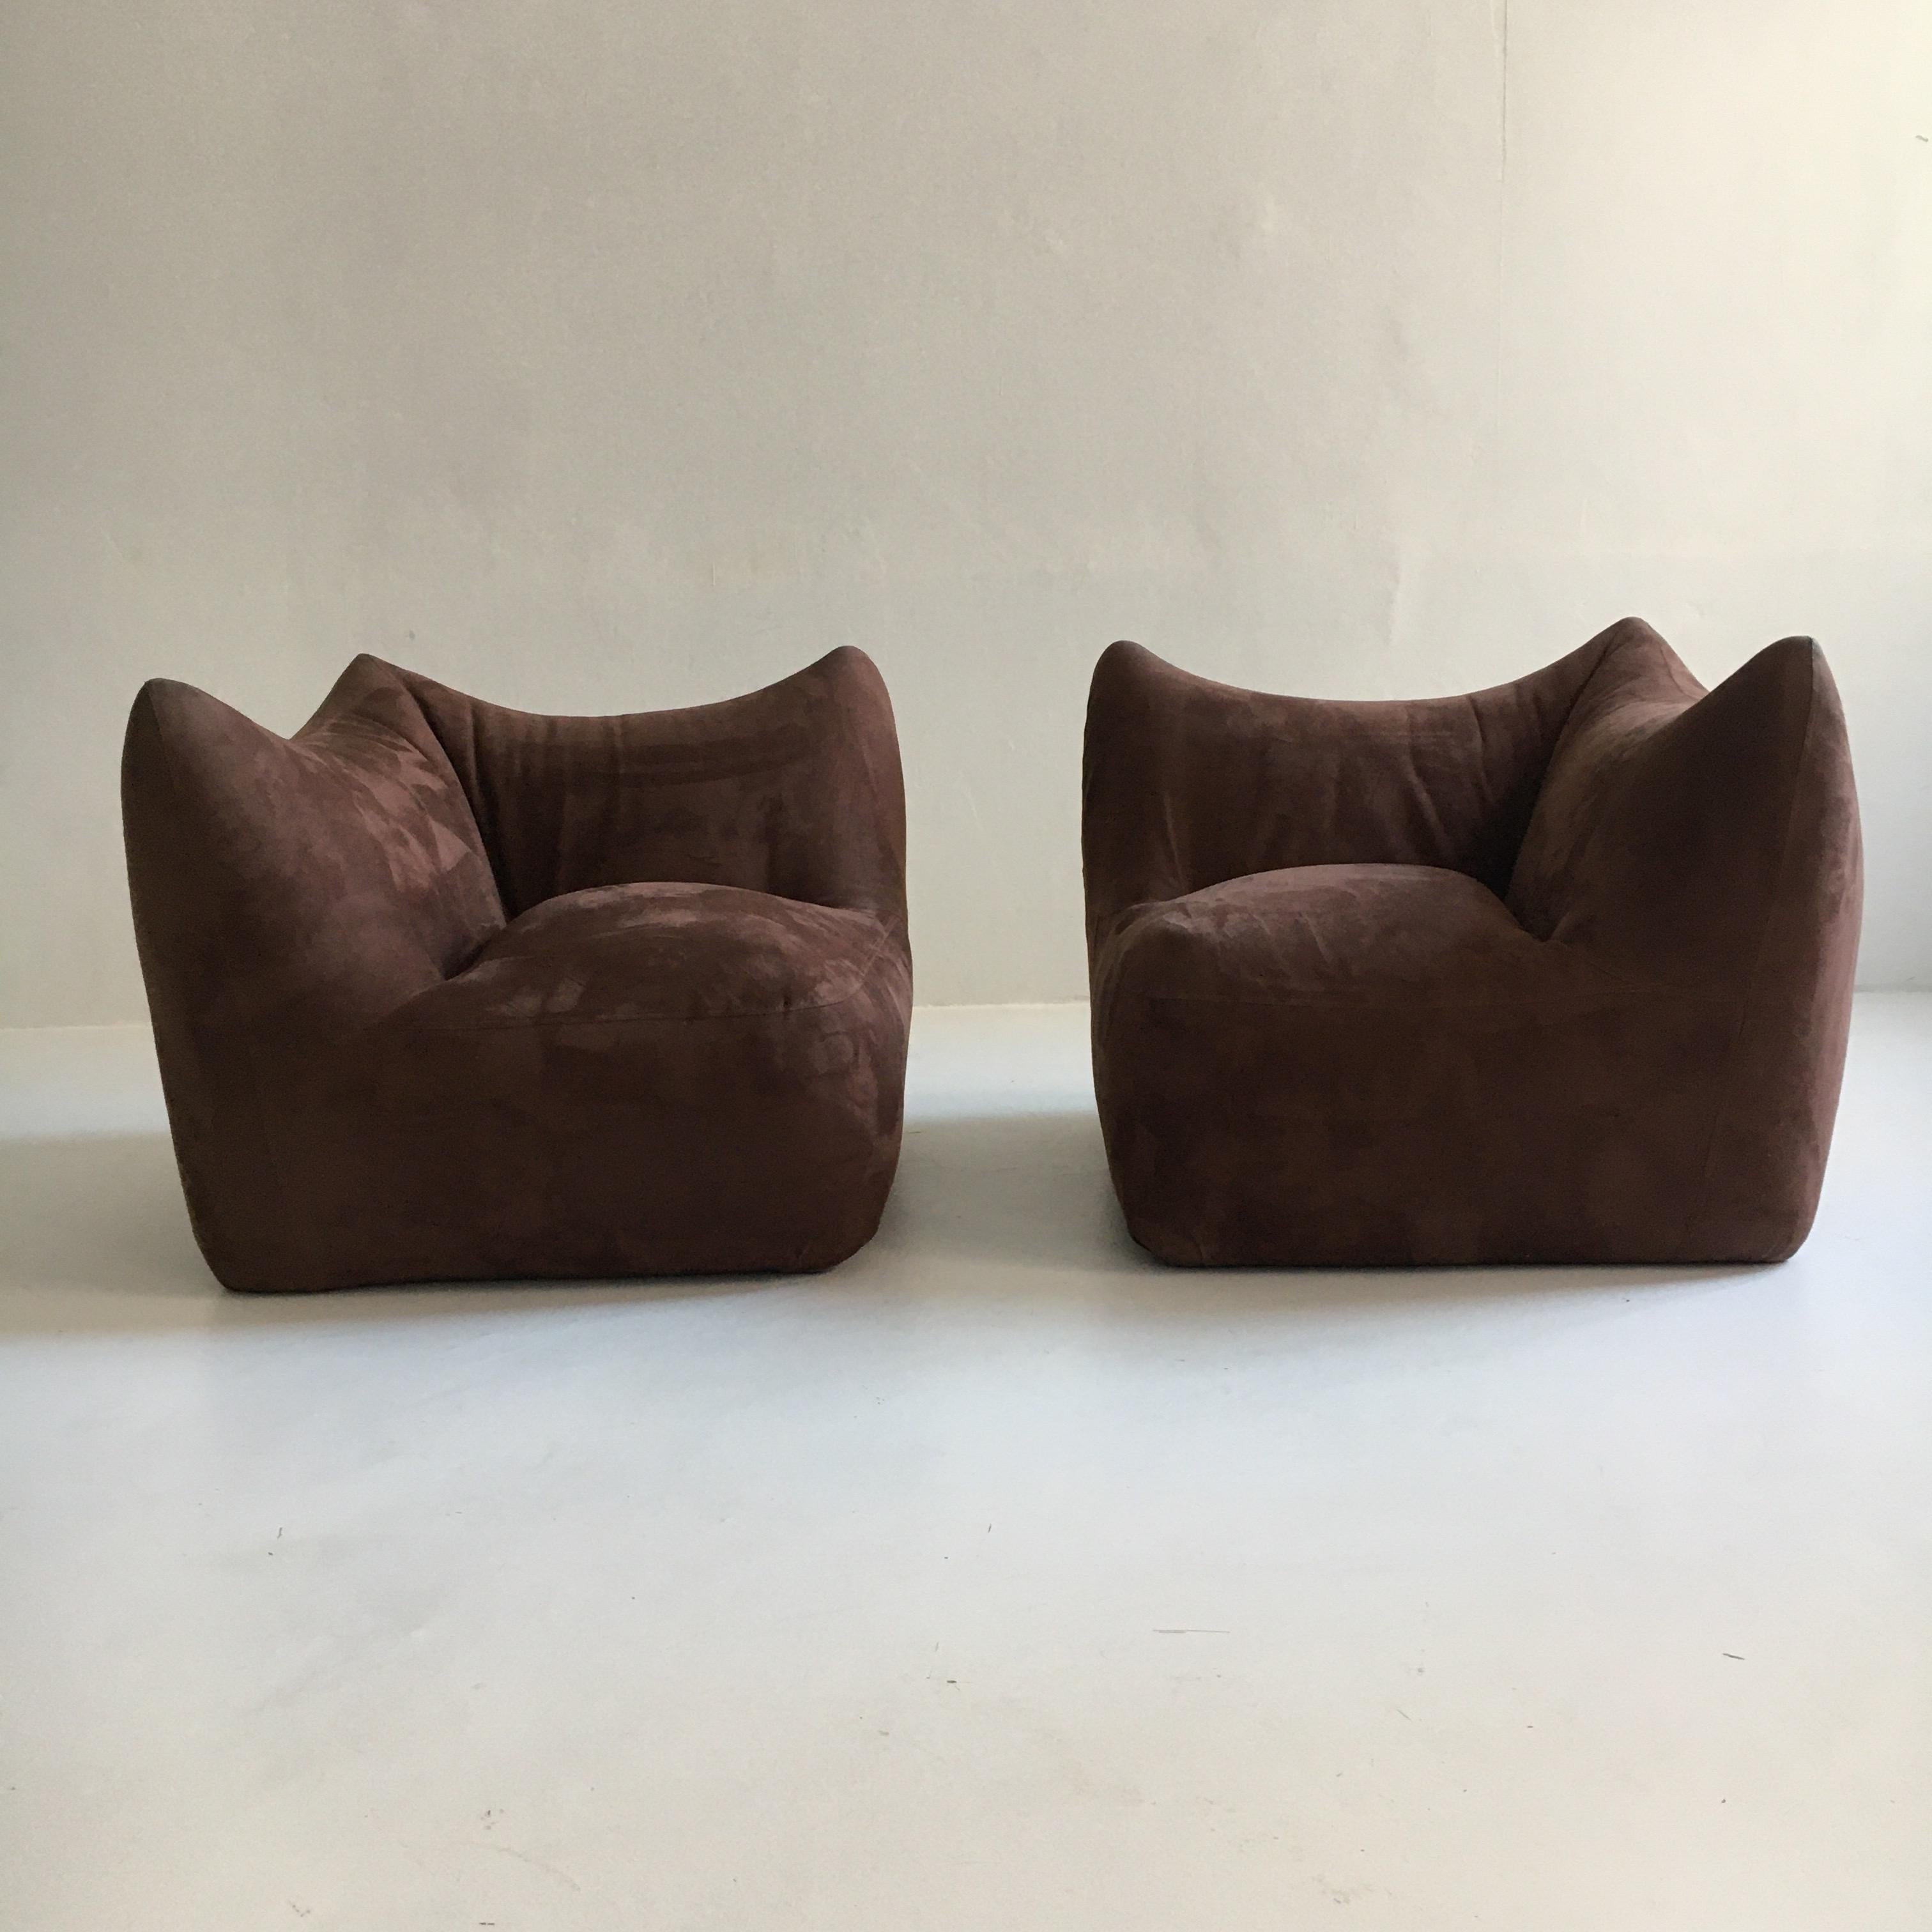 Late 20th Century Mario Bellini 'Le Bambole' Two Modular Elements, Pair of Lounge Chairs, Italy